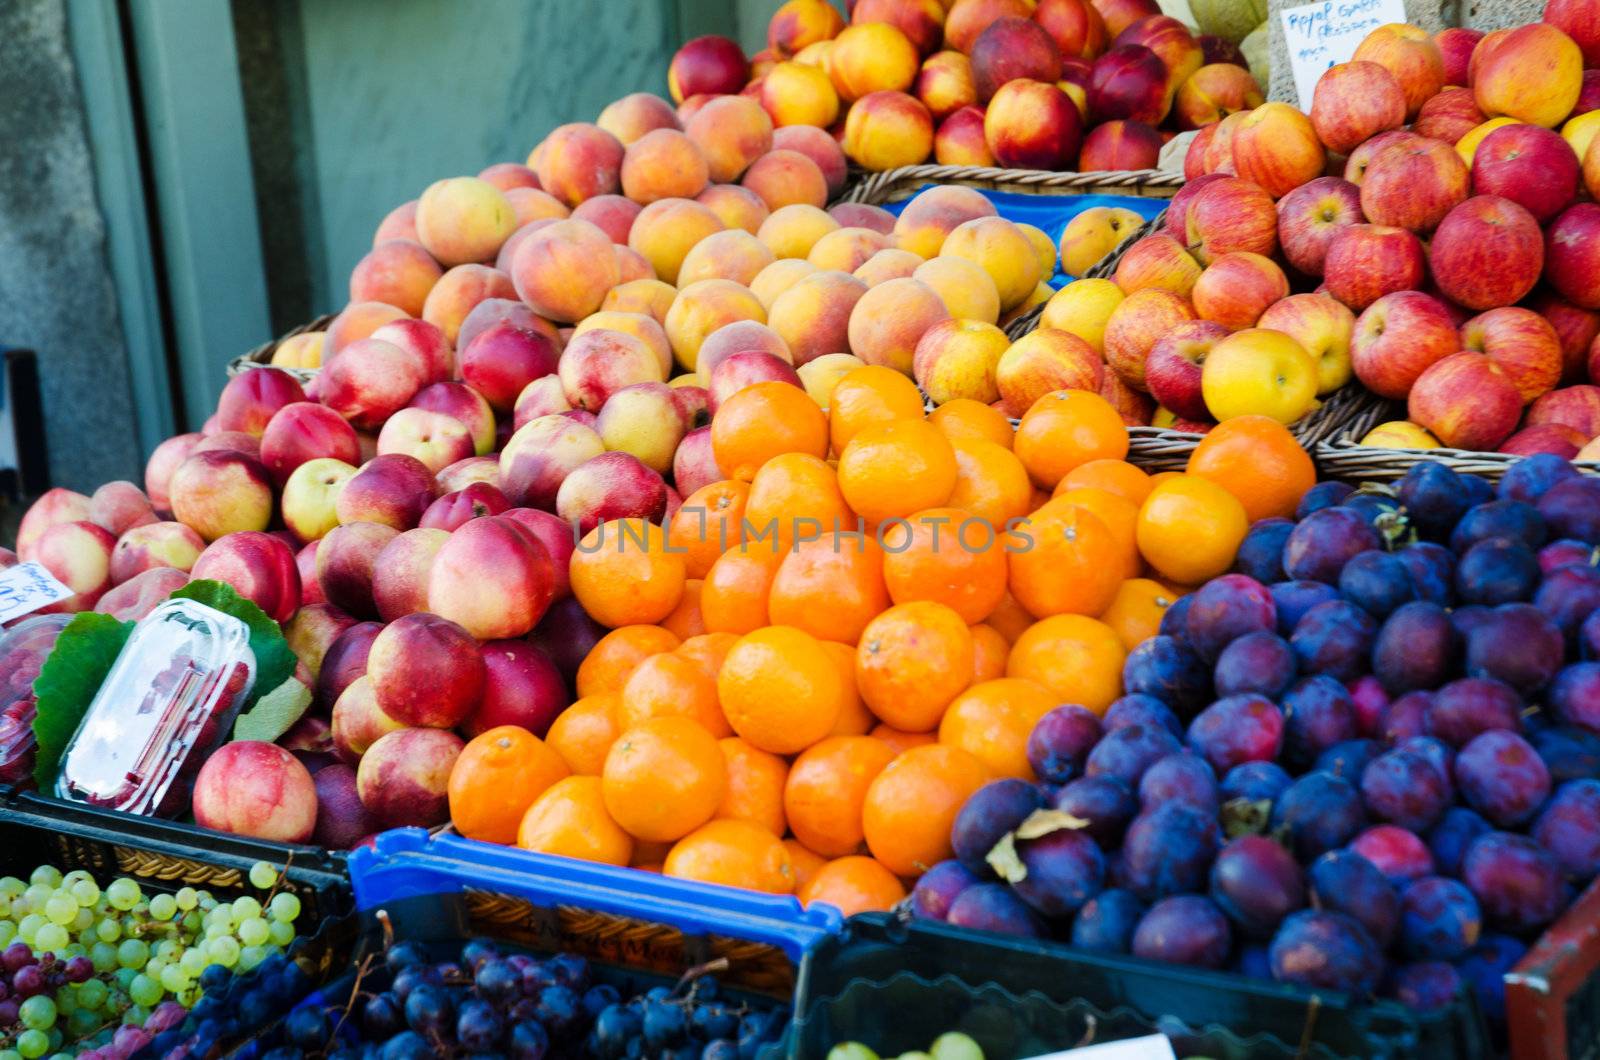 Fruits at the market stall by Elnur